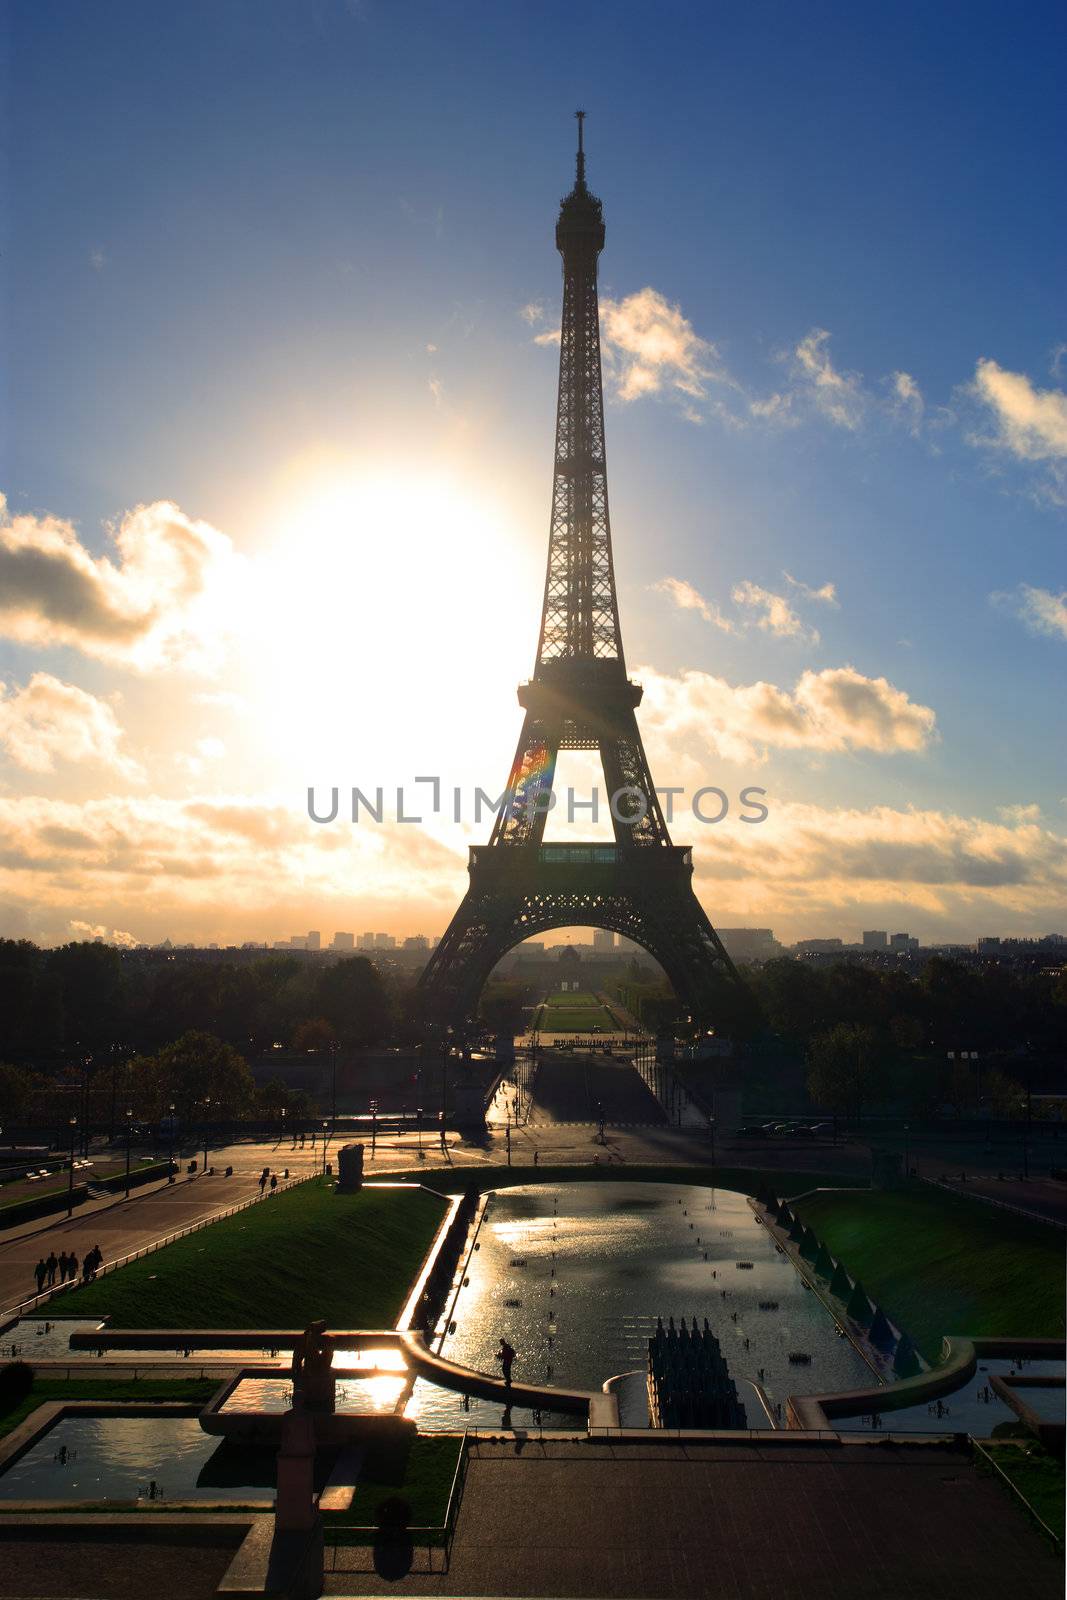 The Eiffel Tower in Paris, France in the morning as the sun rises.
